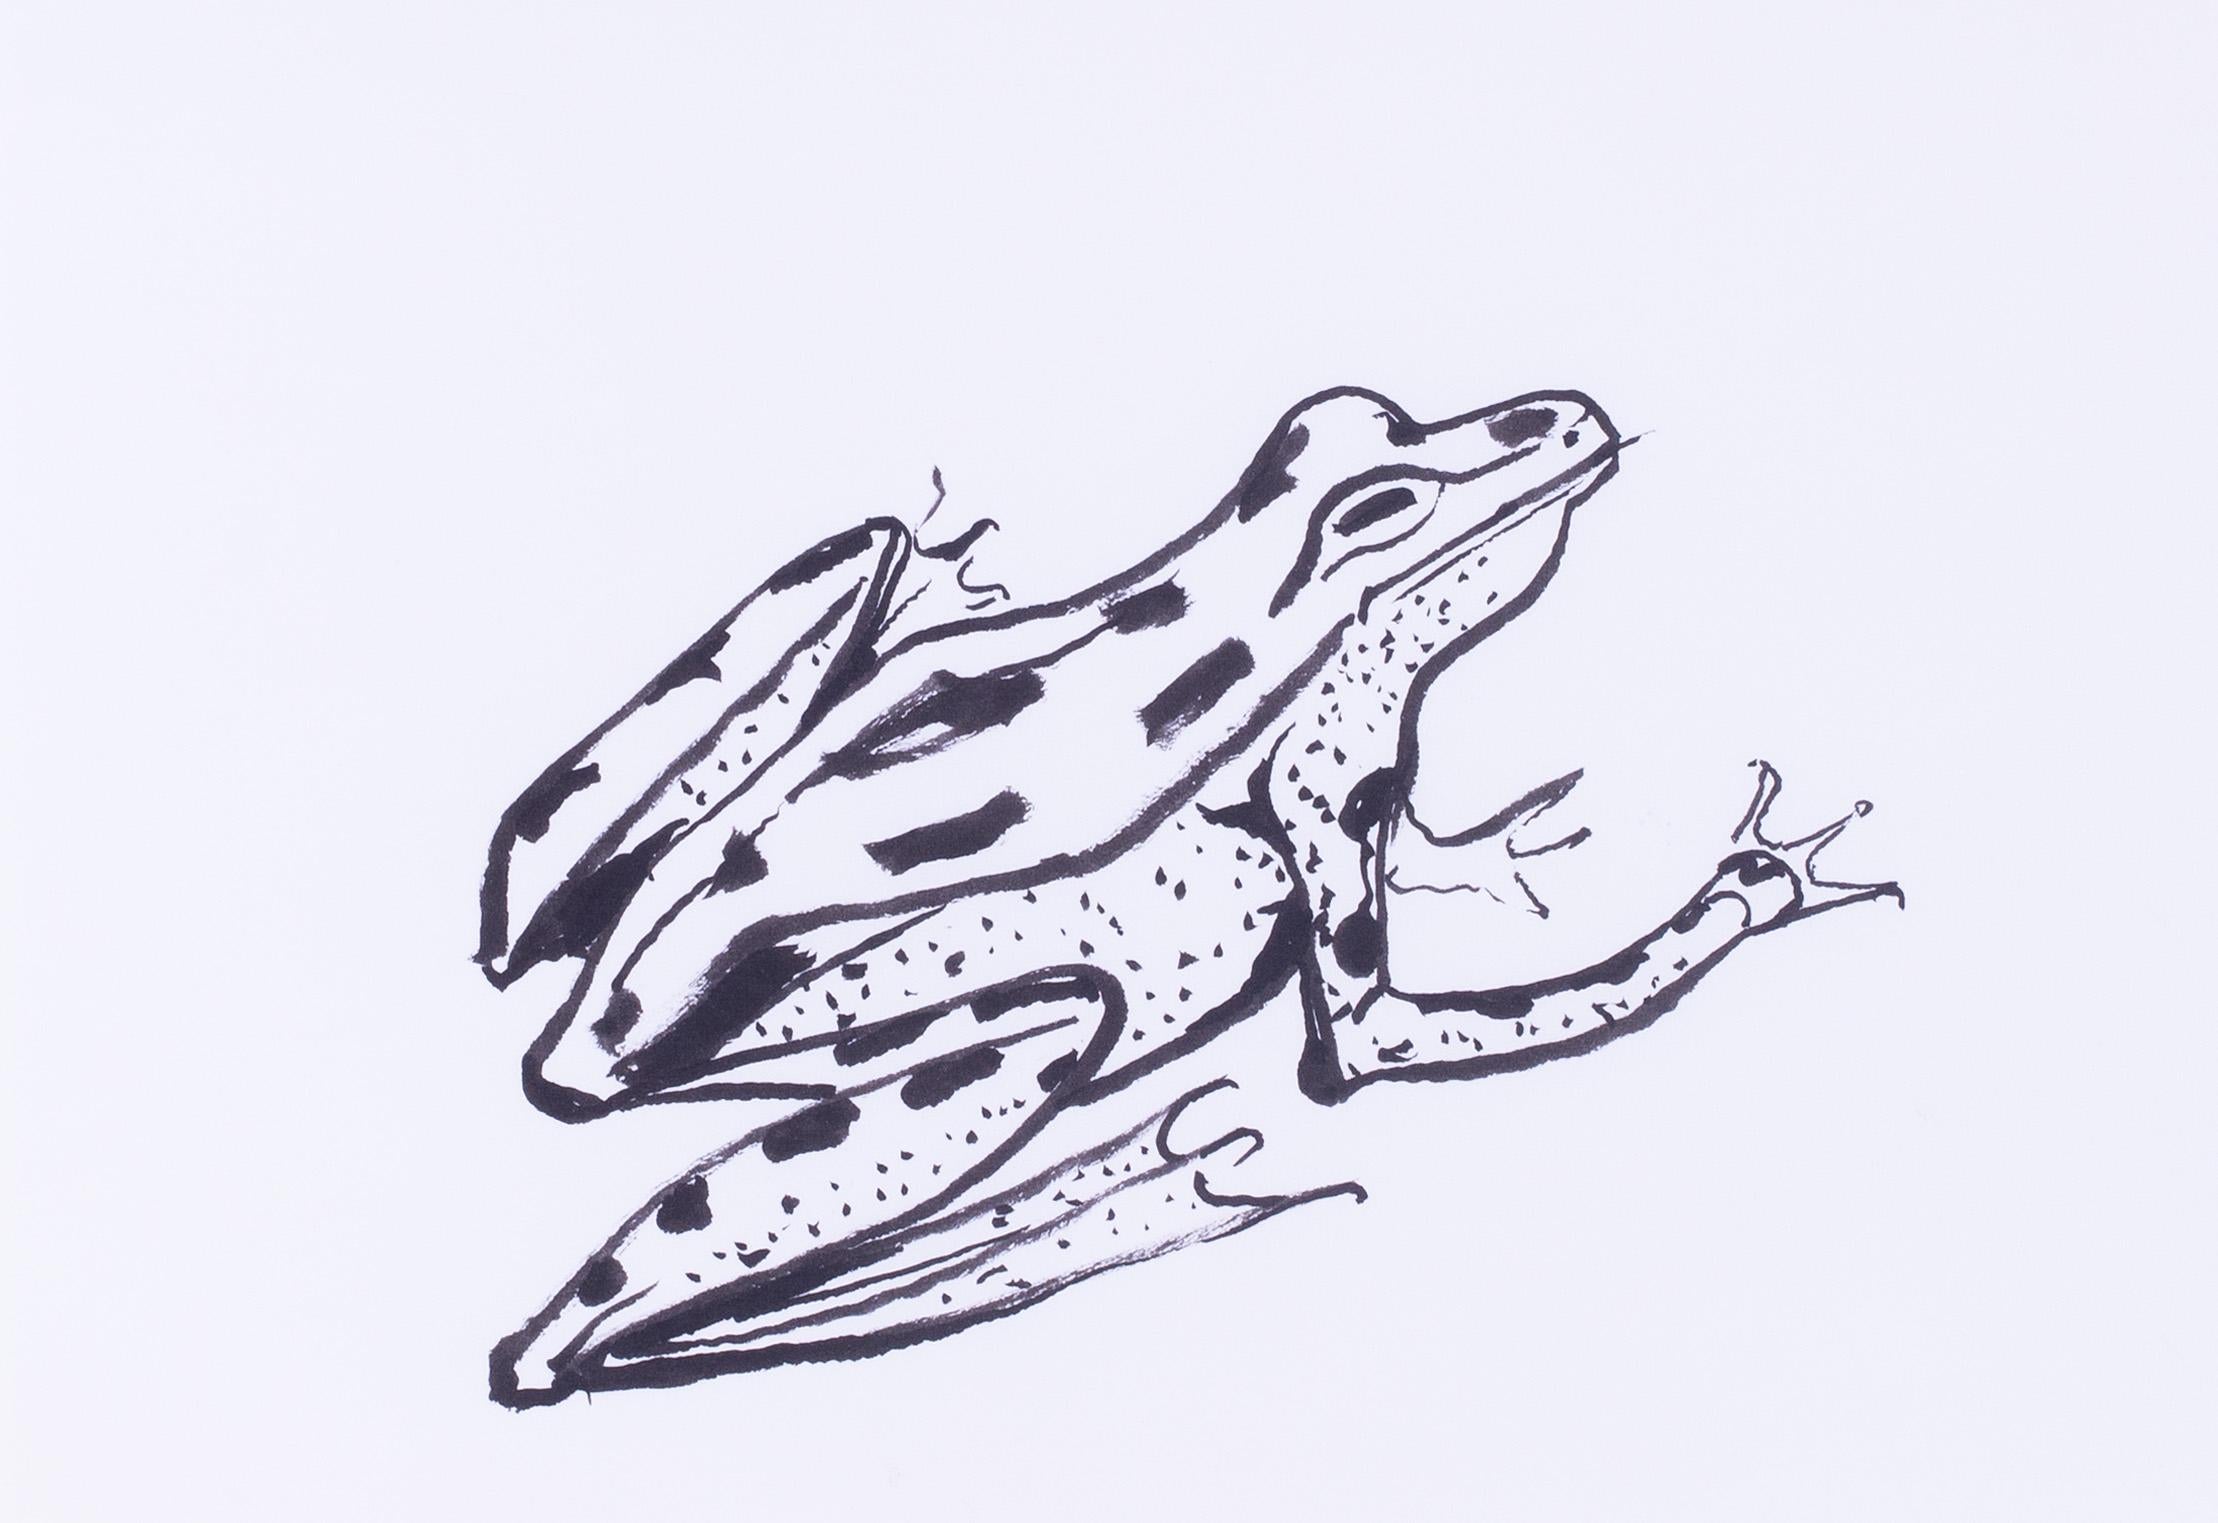 Sven Berlin (British, 1911 - 1999)
A toad
Pen and ink
7.7/8 x 11 in. (20 x 28 cm.)

Sven Berlin, born in Sydenham, London on 14th September 1911, was an English painter, draughtman and writer. He was a key player in the development of the St. Ives